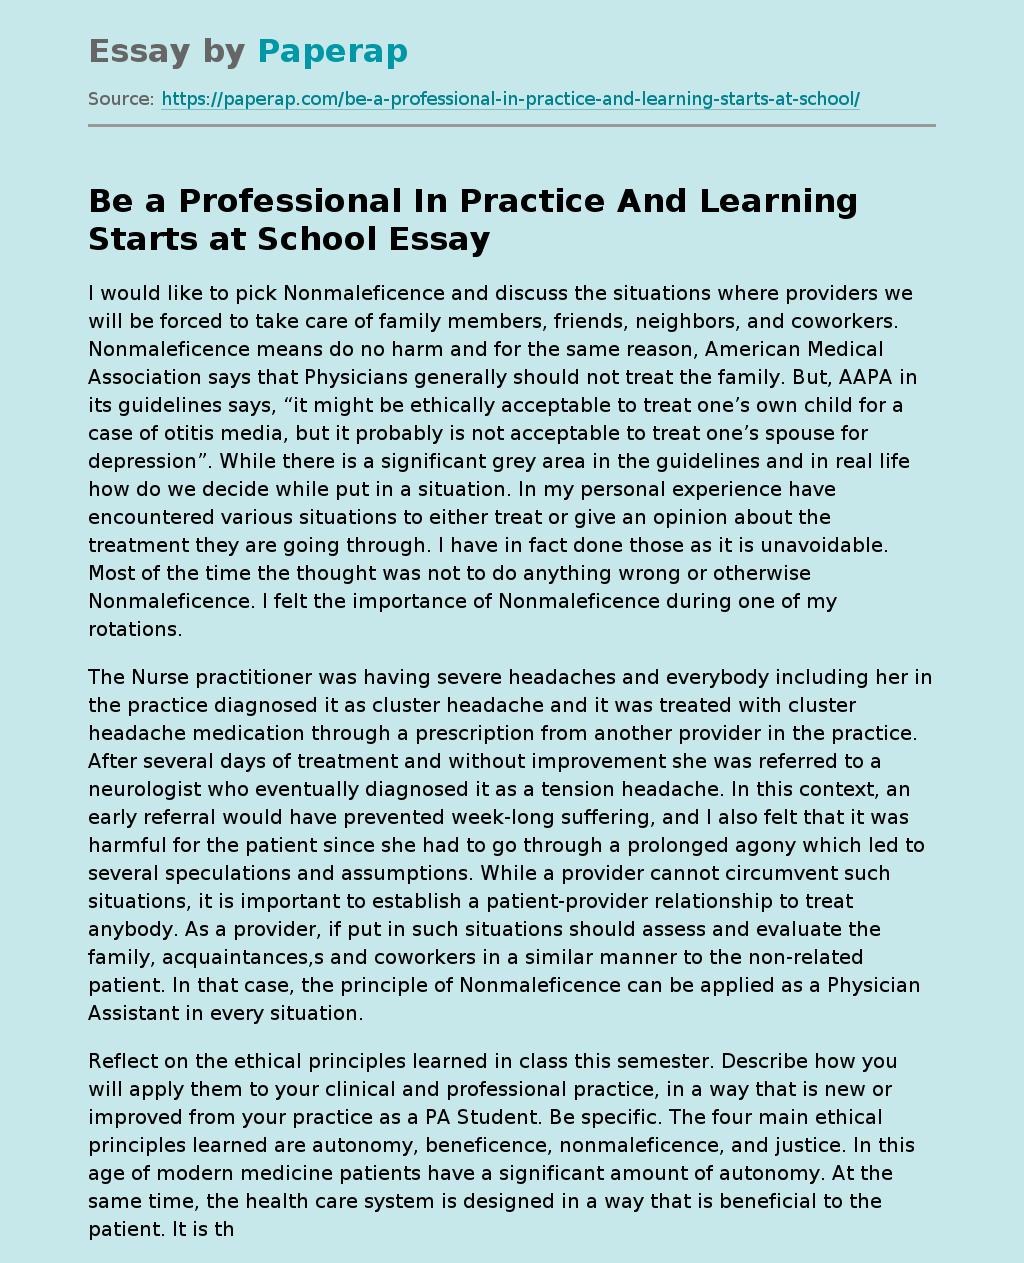 Be a Professional In Practice And Learning Starts at School